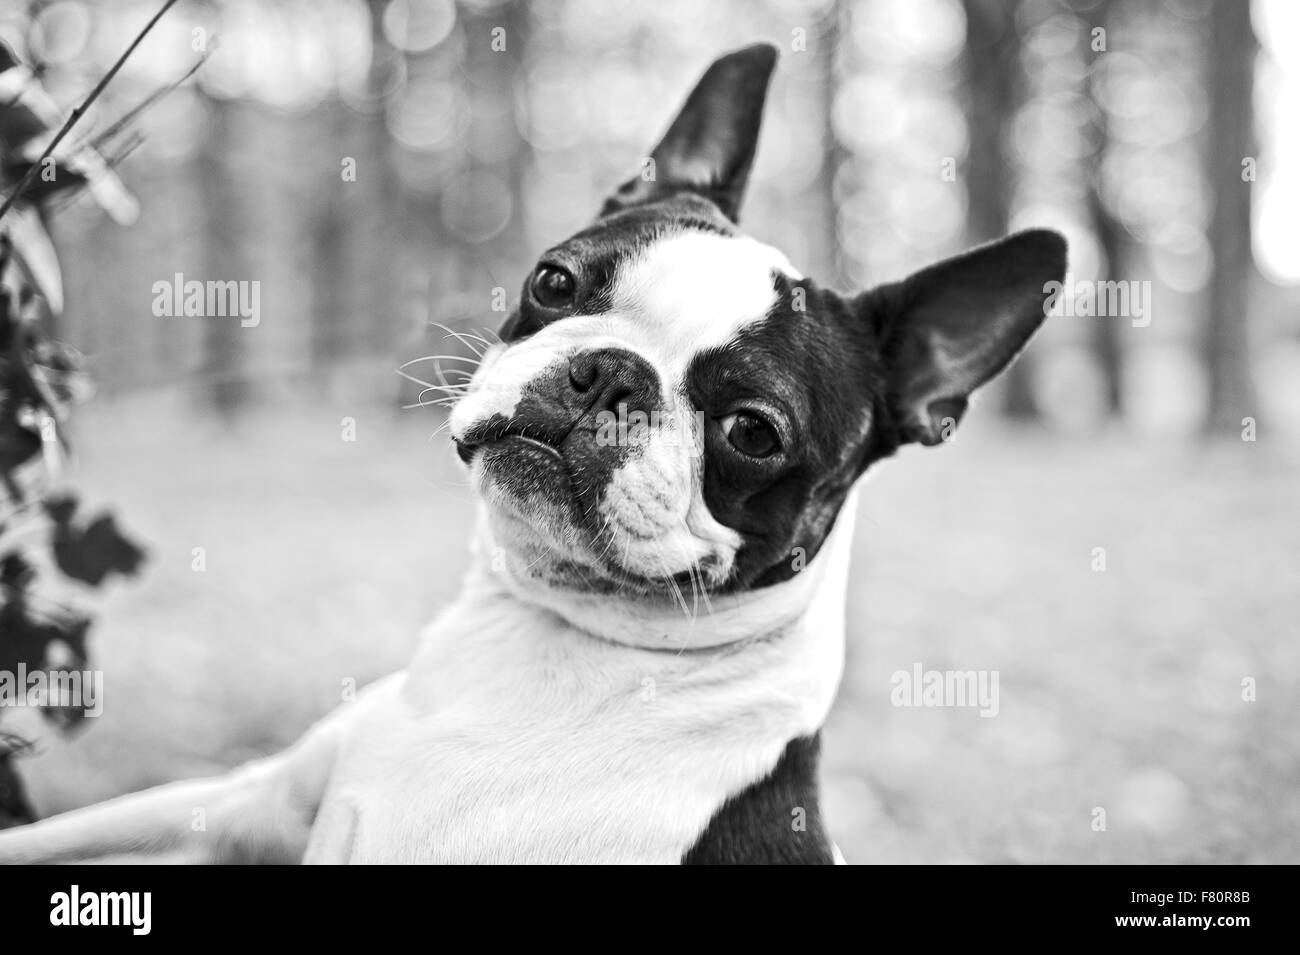 Meadow with dog Black and White Stock Photos & Images - Alamy